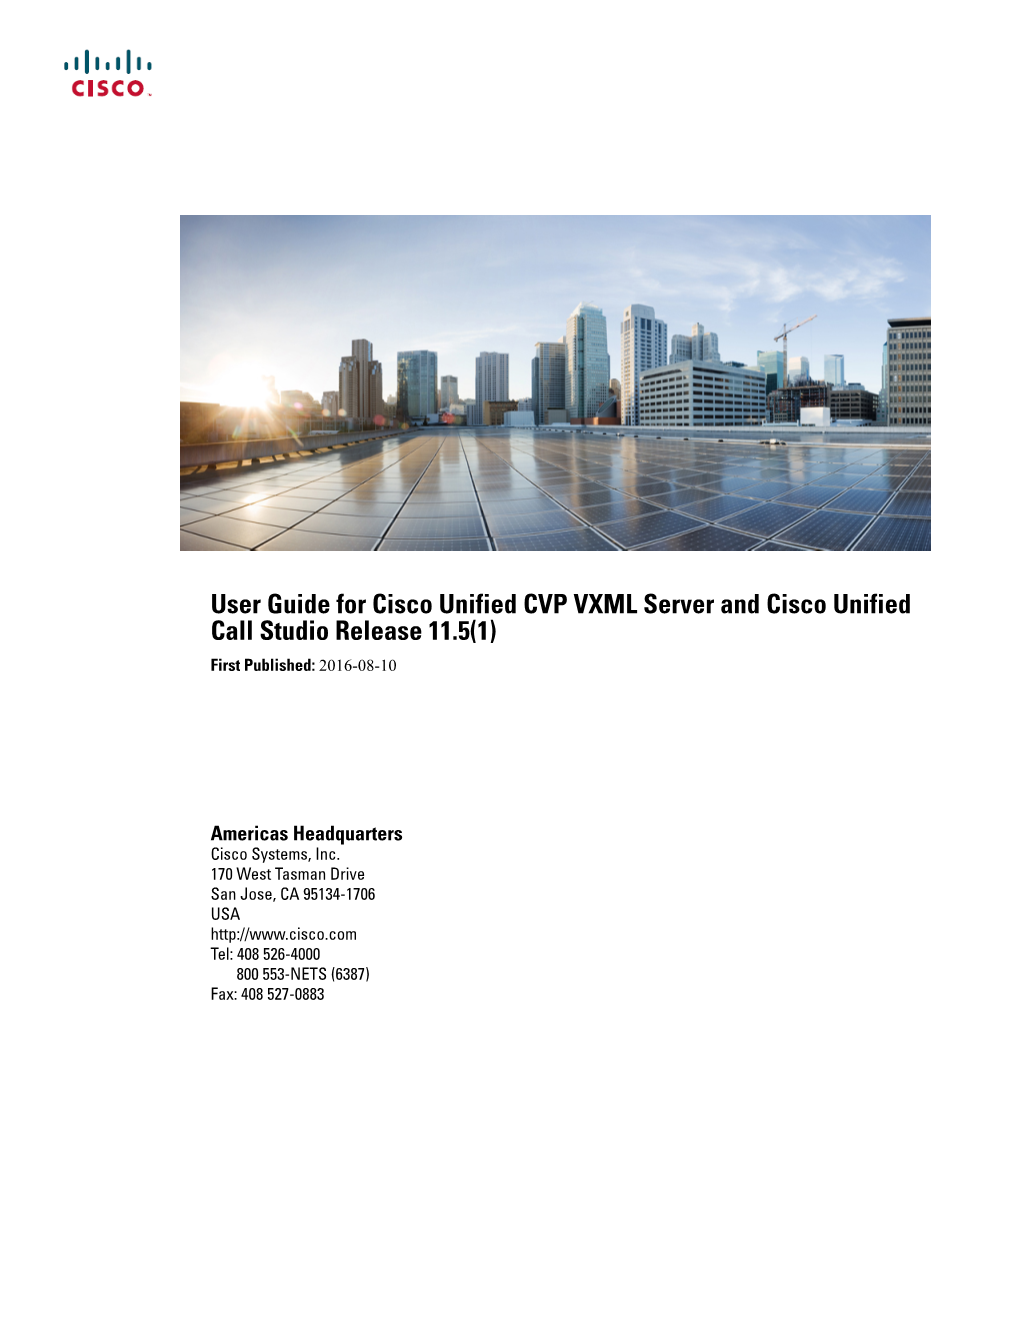 User Guide for Cisco Unified CVP VXML Server and Cisco Unified Call Studio Release 11.5(1) First Published: 2016-08-10